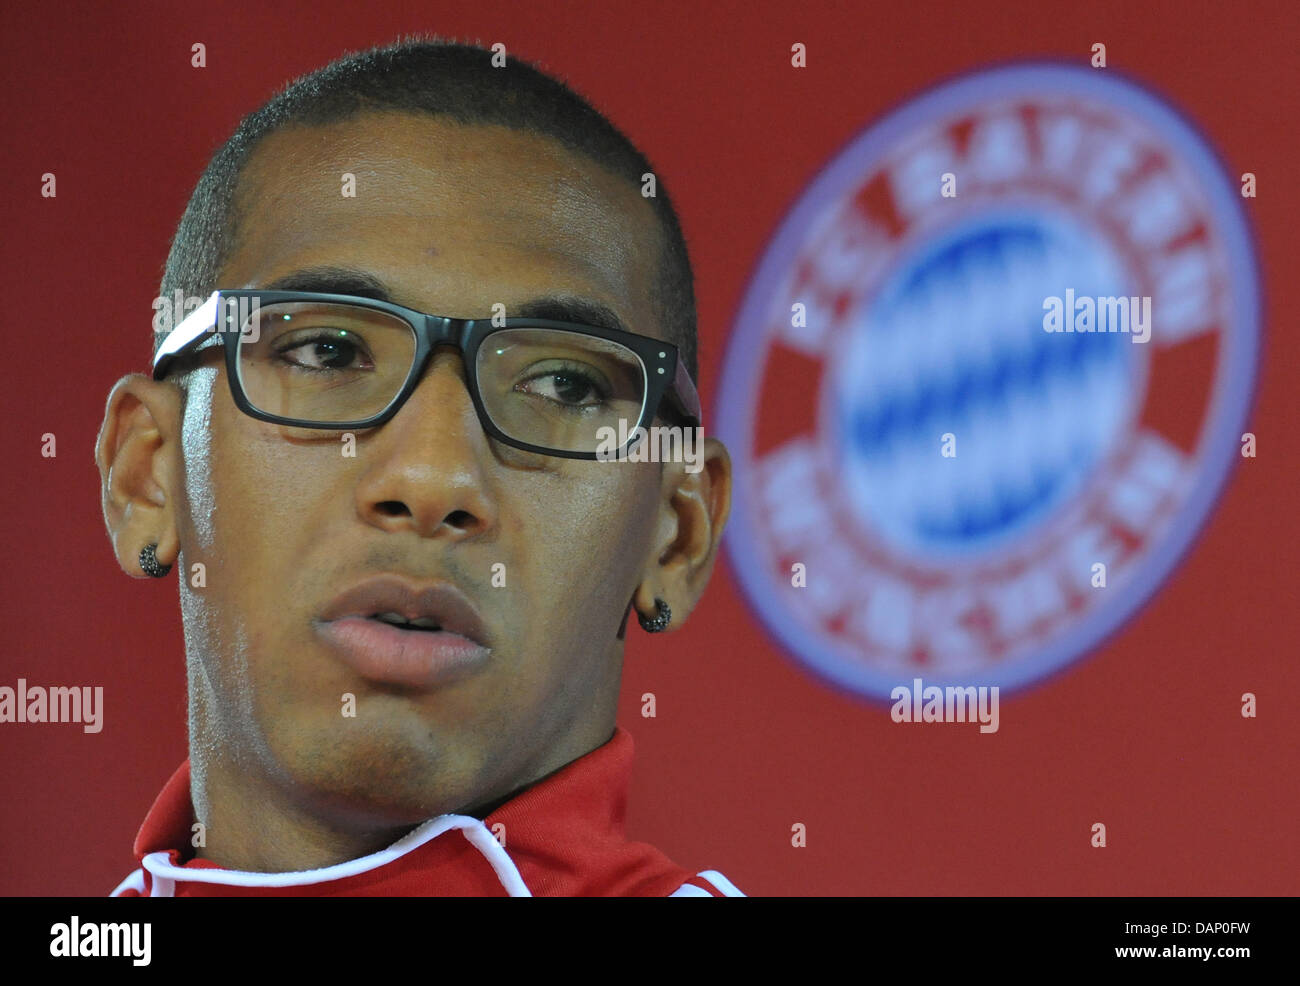 New FC Bayern Munich player Jerome Boateng attends an introductory press conference at the Bundesliga club's facilities in Munich, Germany, 17 July 2011. Photo: Andreas Gebert Stock Photo